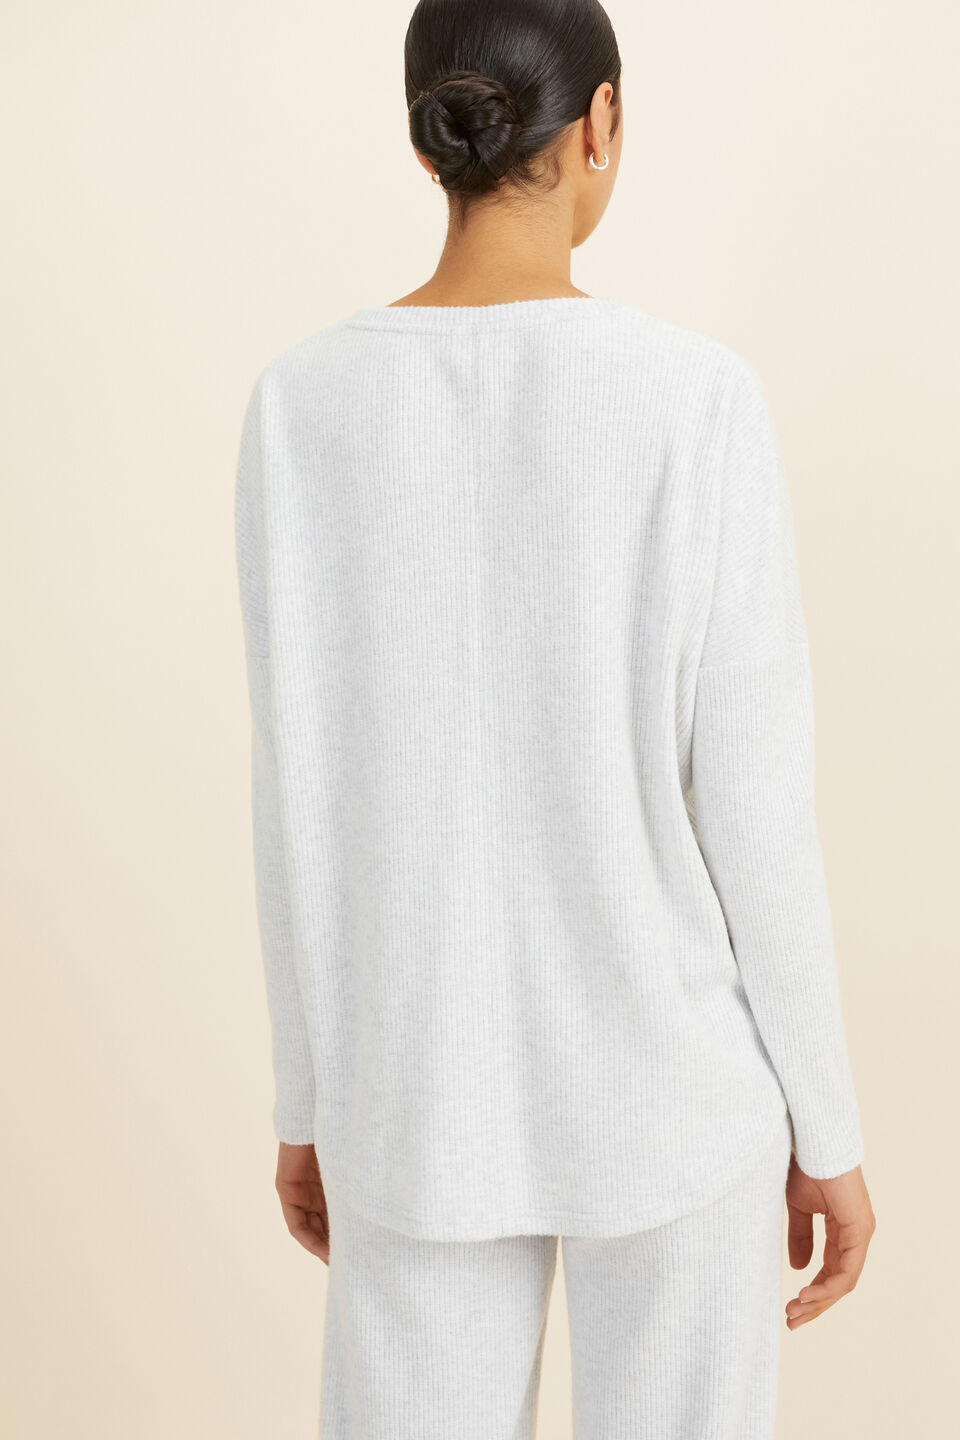 Supersoft Relaxed Top  Light Grey Marle